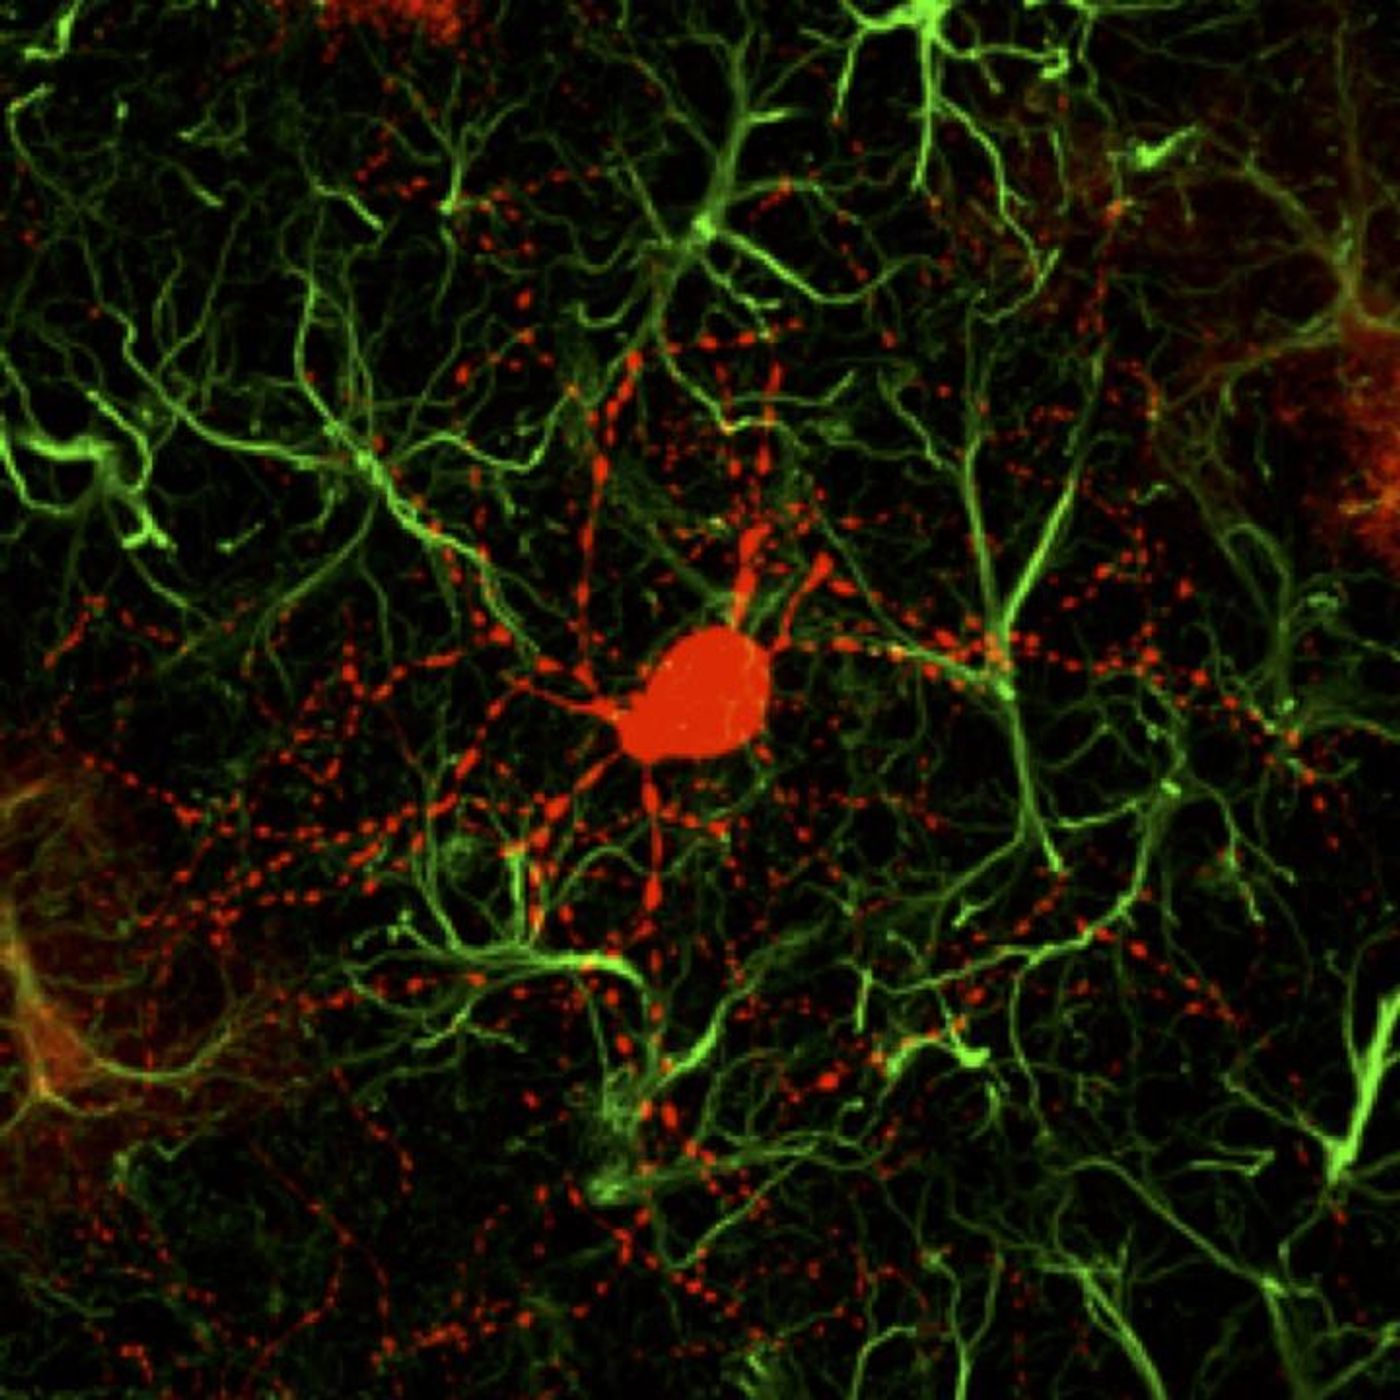 This is a a newly converted neuron (red) surrounded by astrocytes (green). / Credit: Gong Chen and Zheng Wu